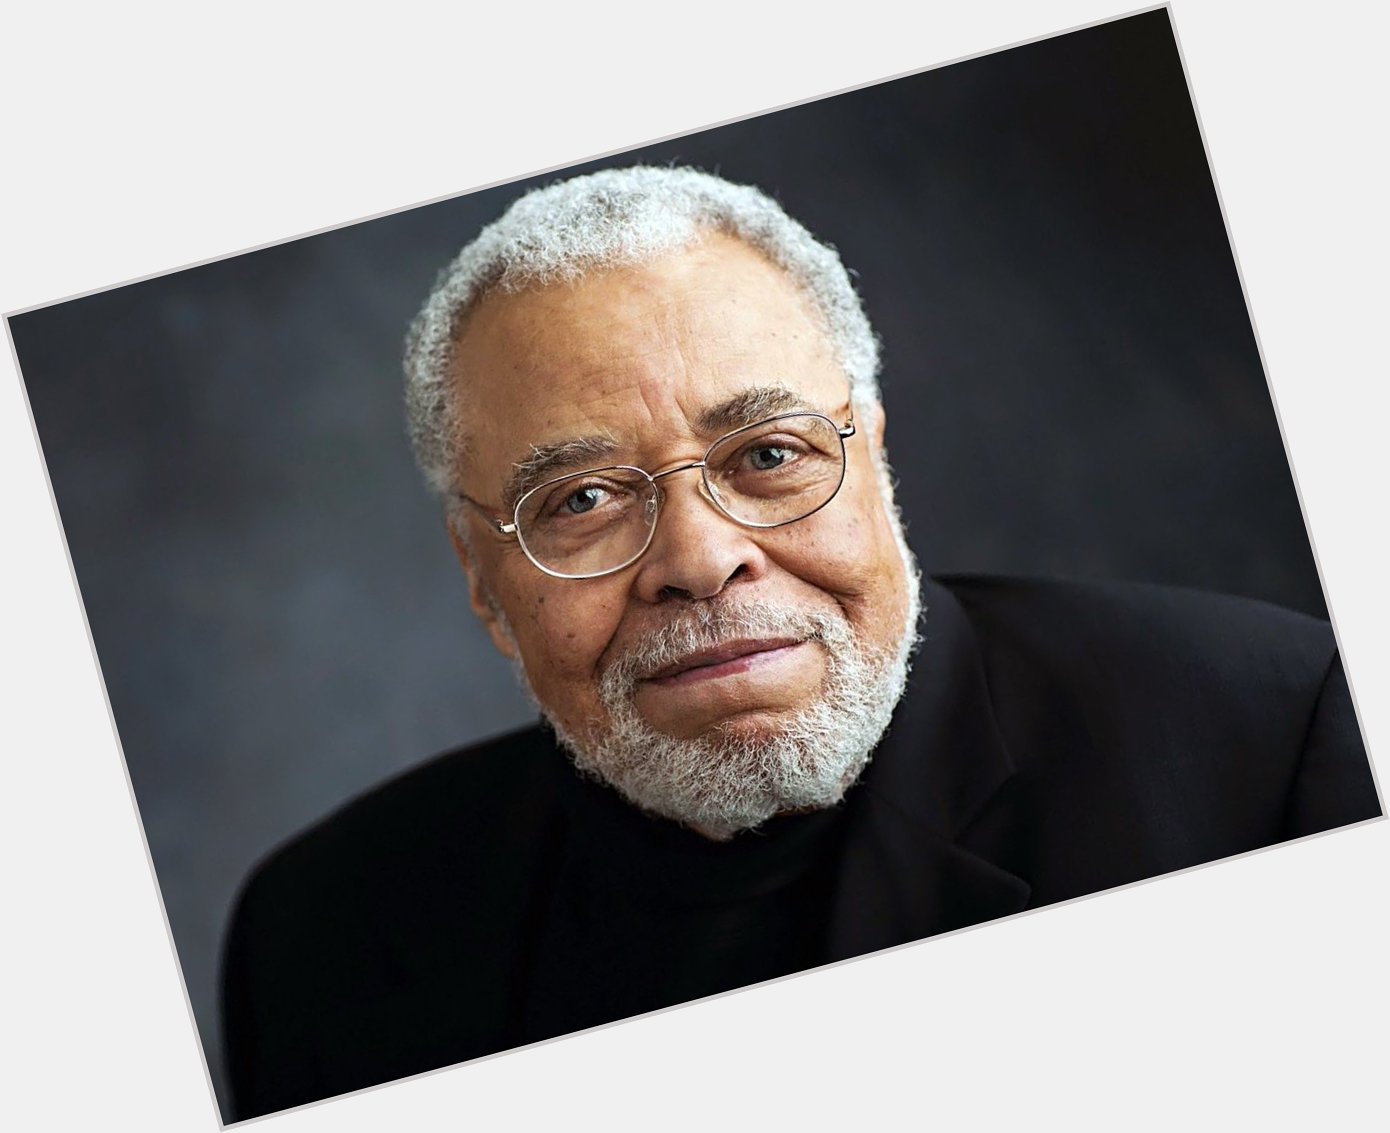 Happy Birthday mister James Earl Jones
The powerful voice of Darth Vader
May the Force be with you 